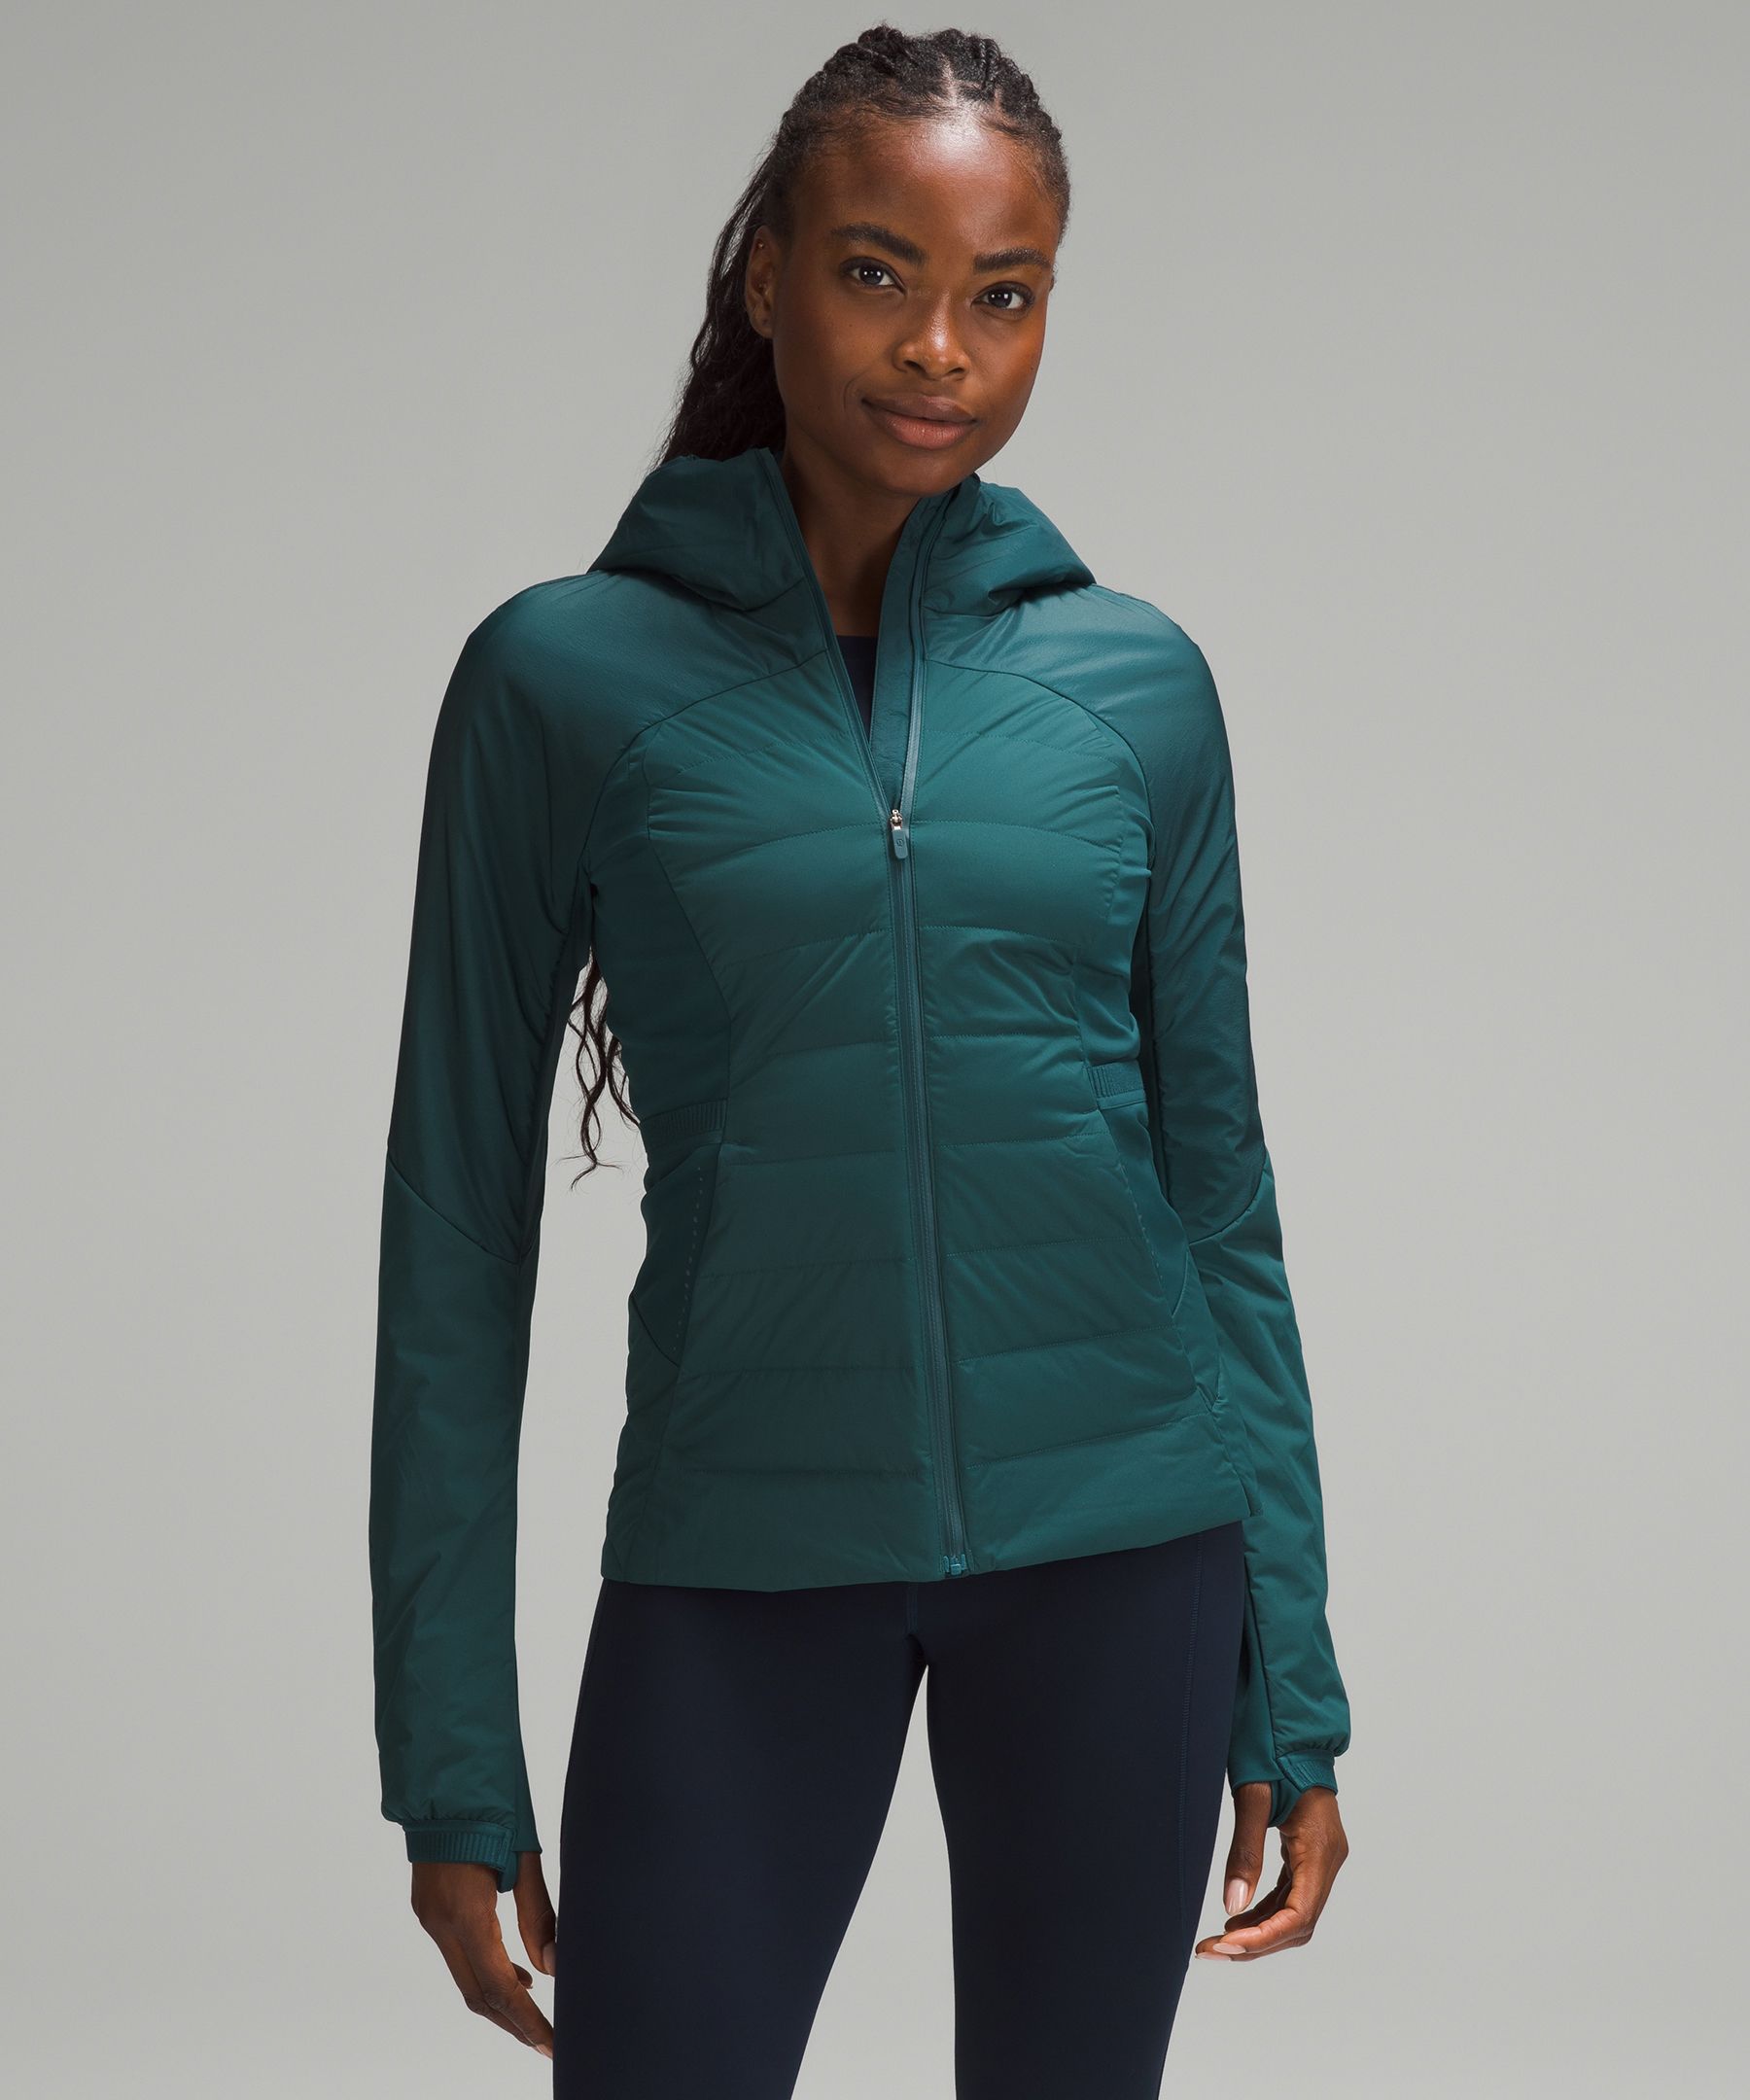 lululemon athletica Down For It All Jacket in Green